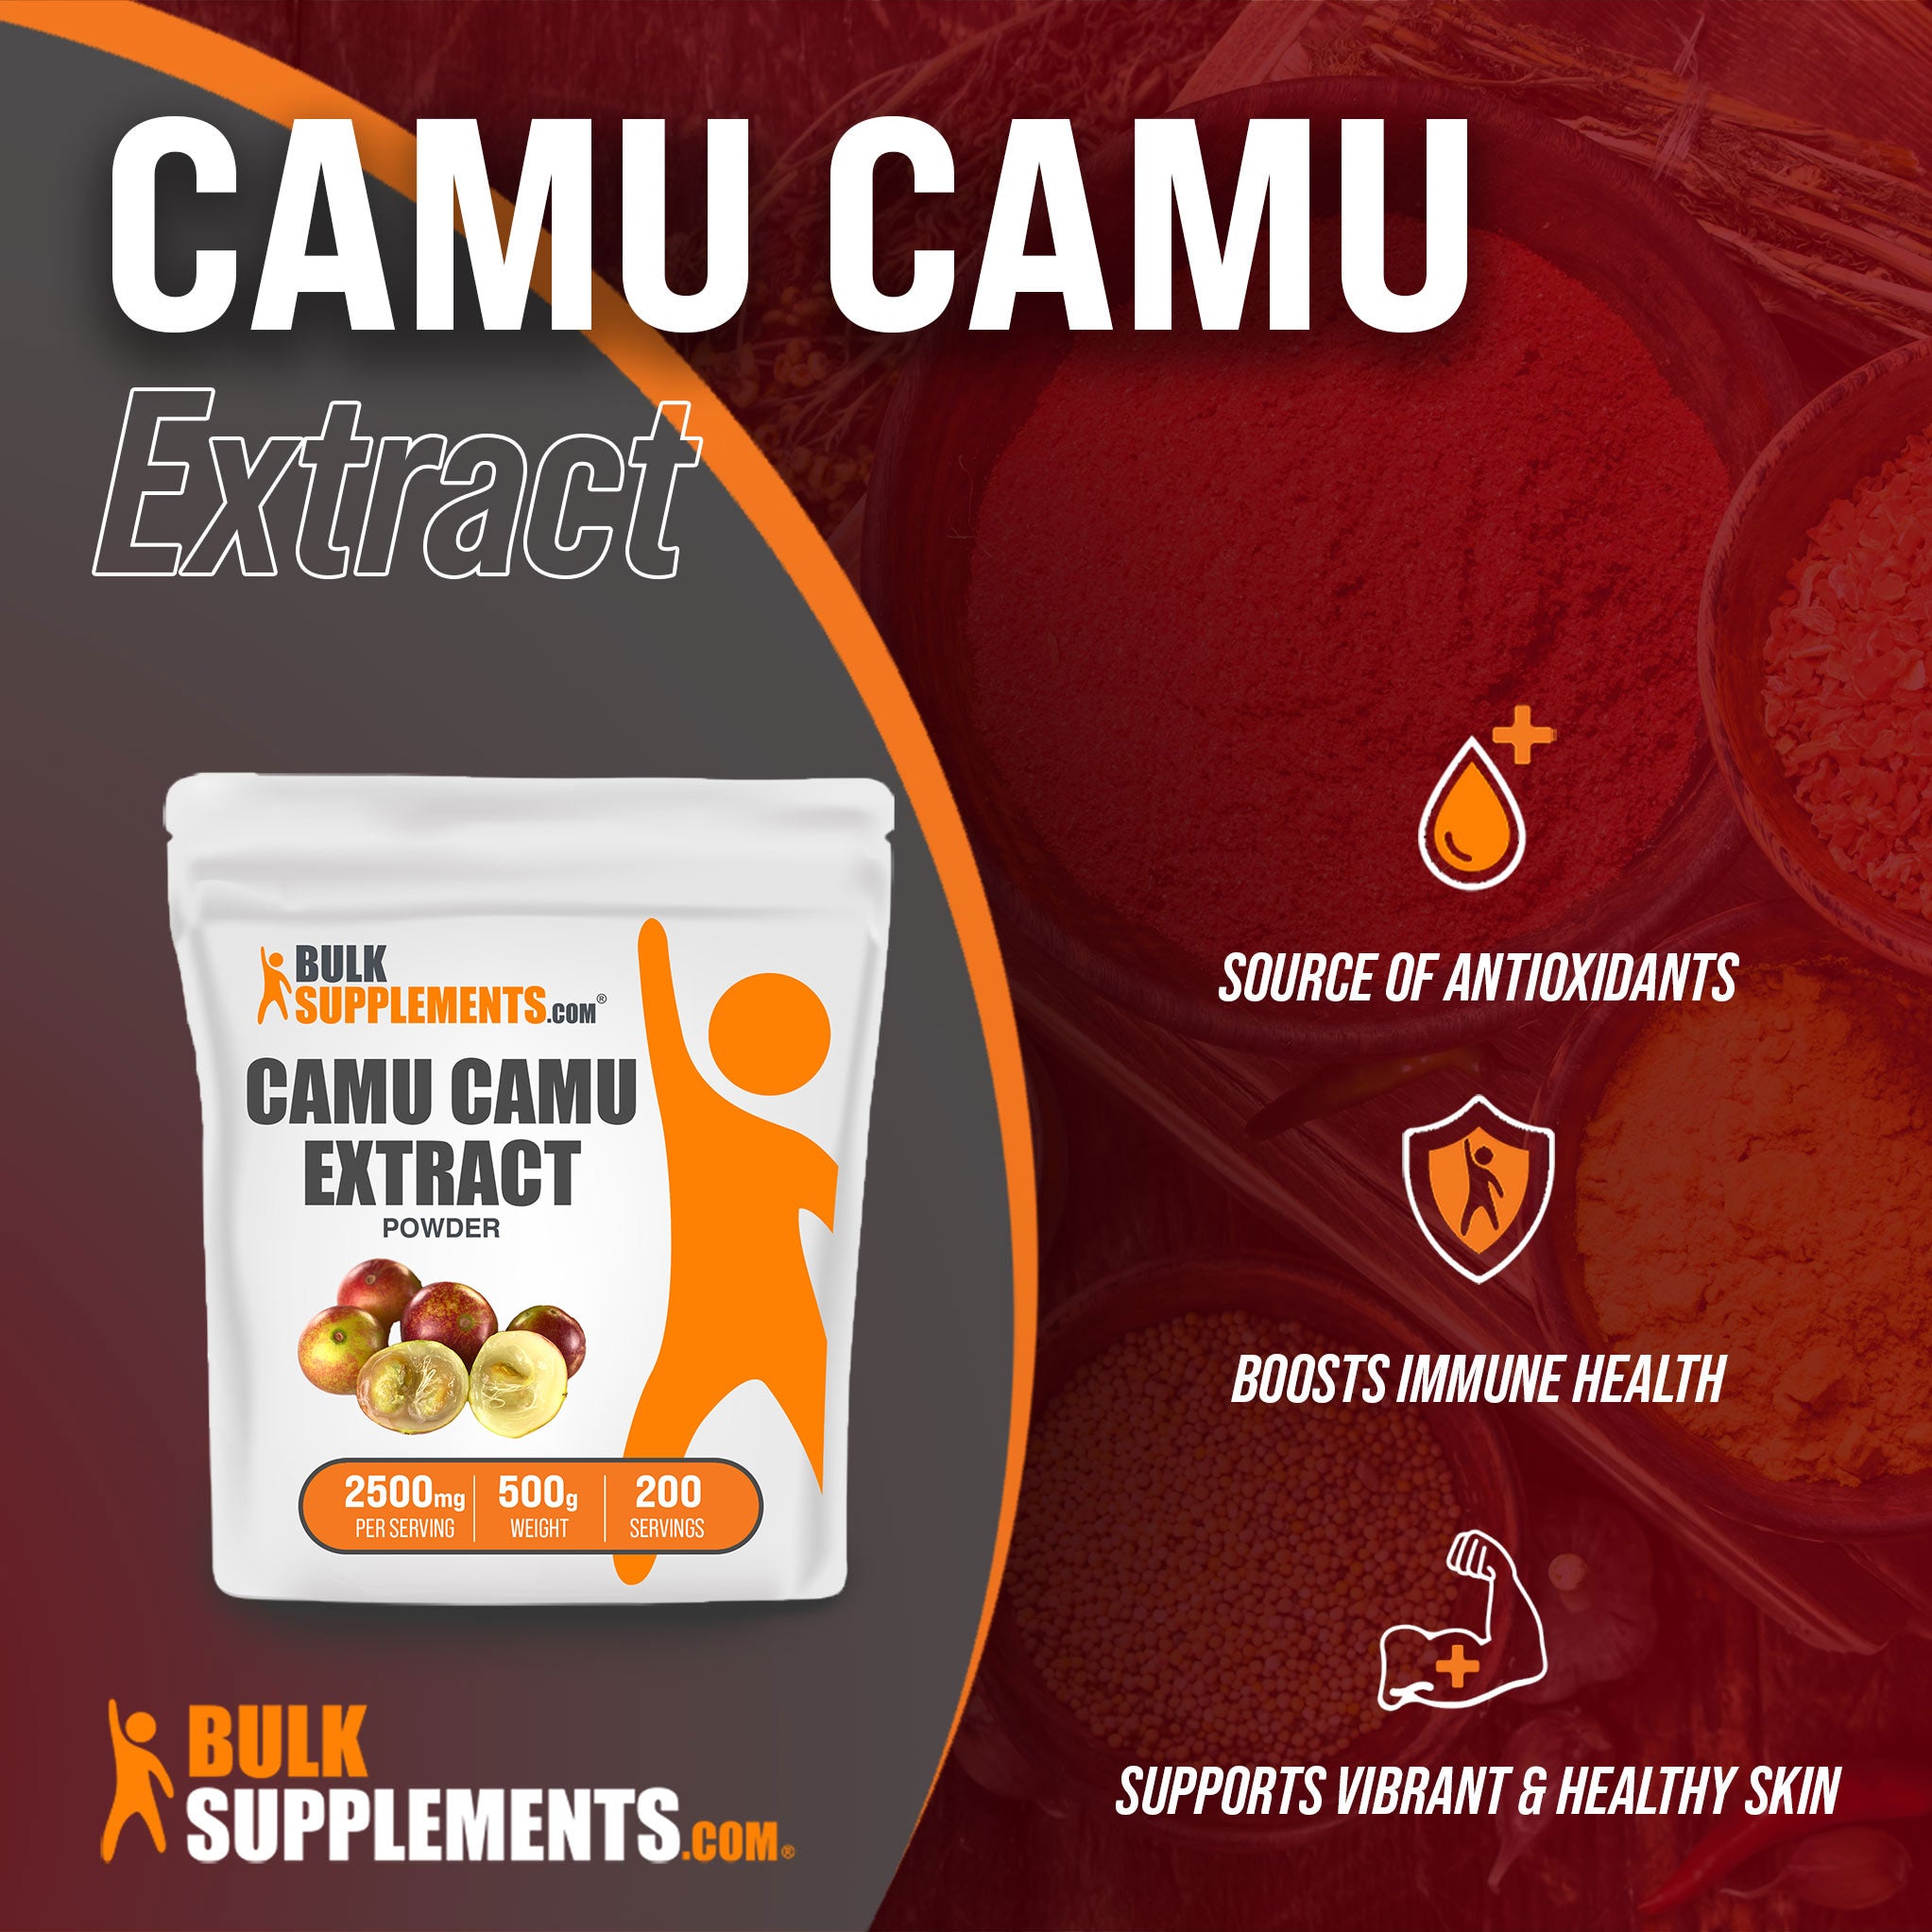 Benefits of Camu Camu Extract; source of antioxidants, boosts immune health, supports vibrant & healthy skin